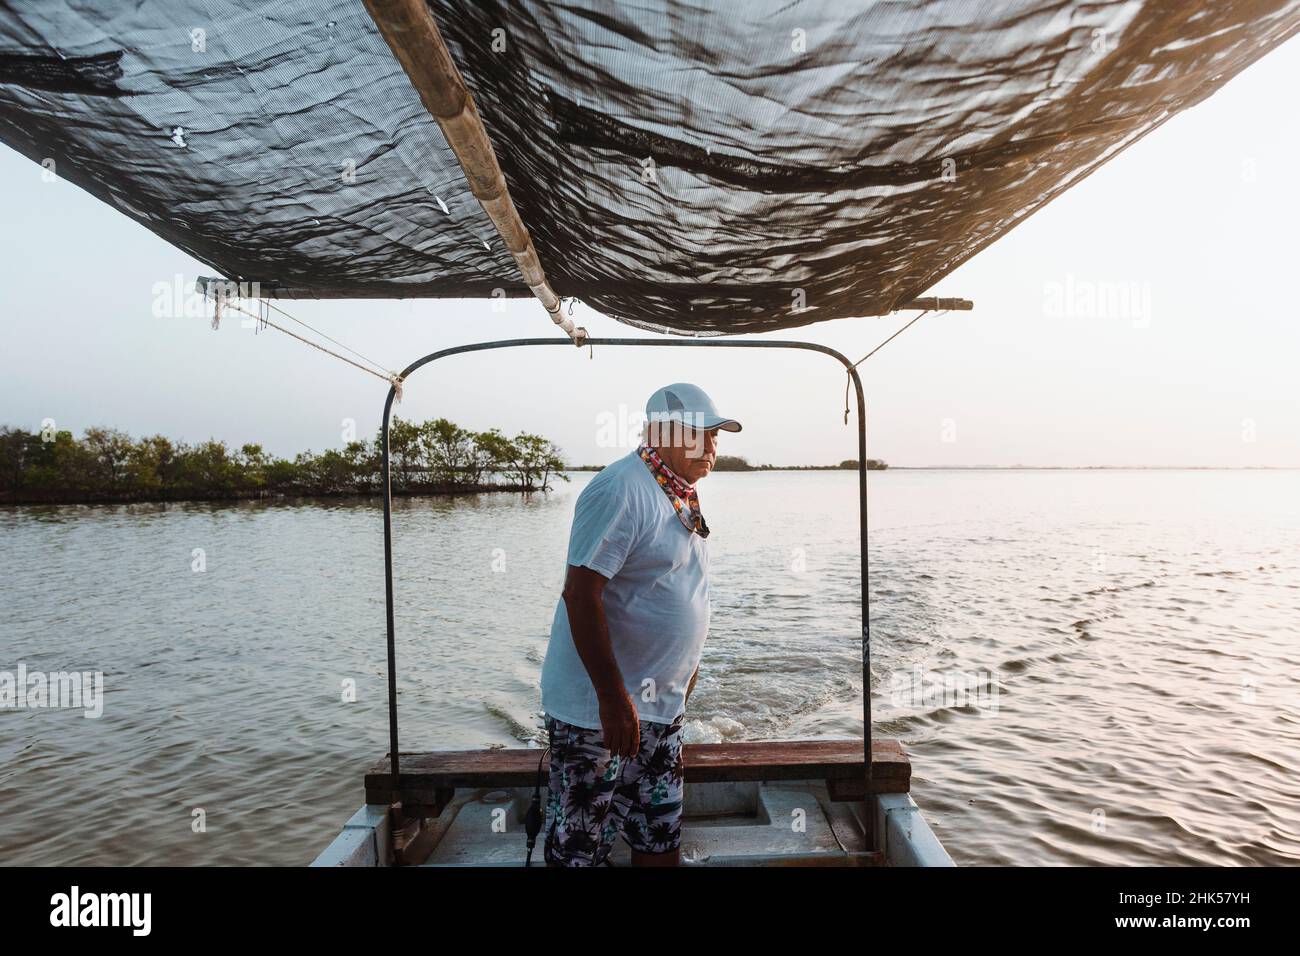 Mexican person on a boat fishing Stock Photo